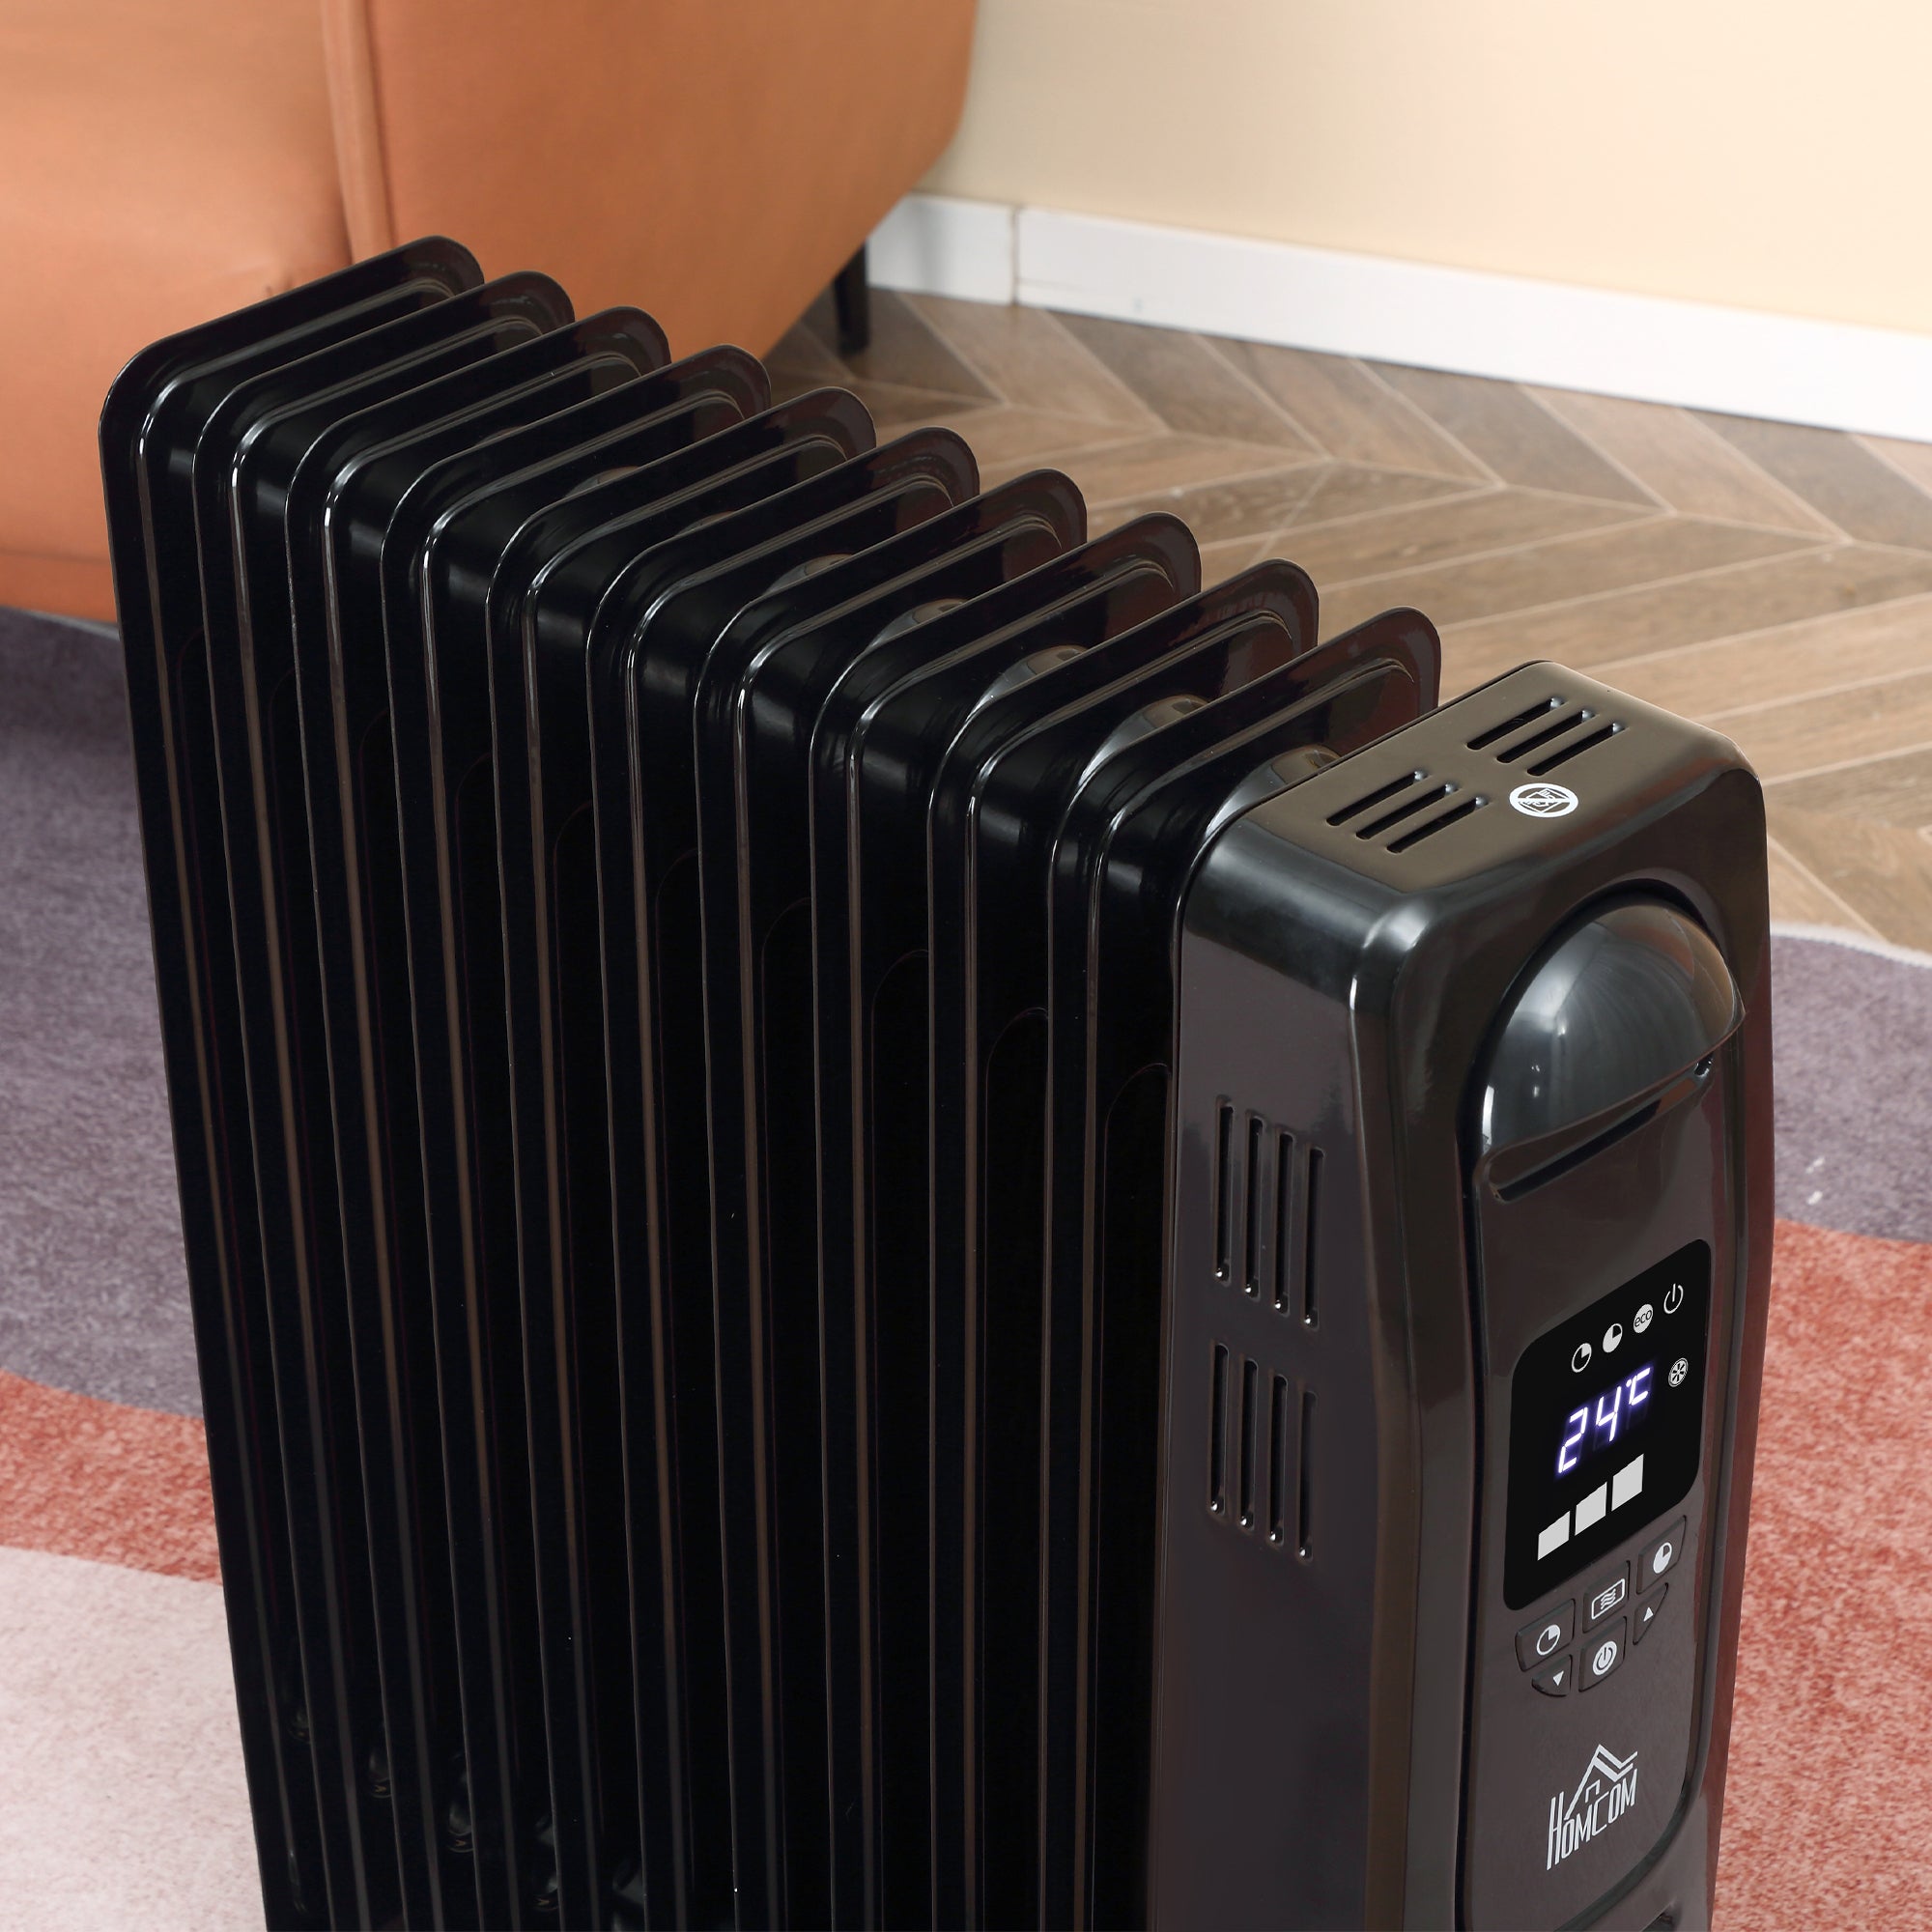 HOMCOM 2180W Digital Oil Filled Radiator, 9 Fin, Portable Electric Heater with LED Display, Timer 3 Heat Settings Safety Cut-Off Remote Control Black - Inspirely